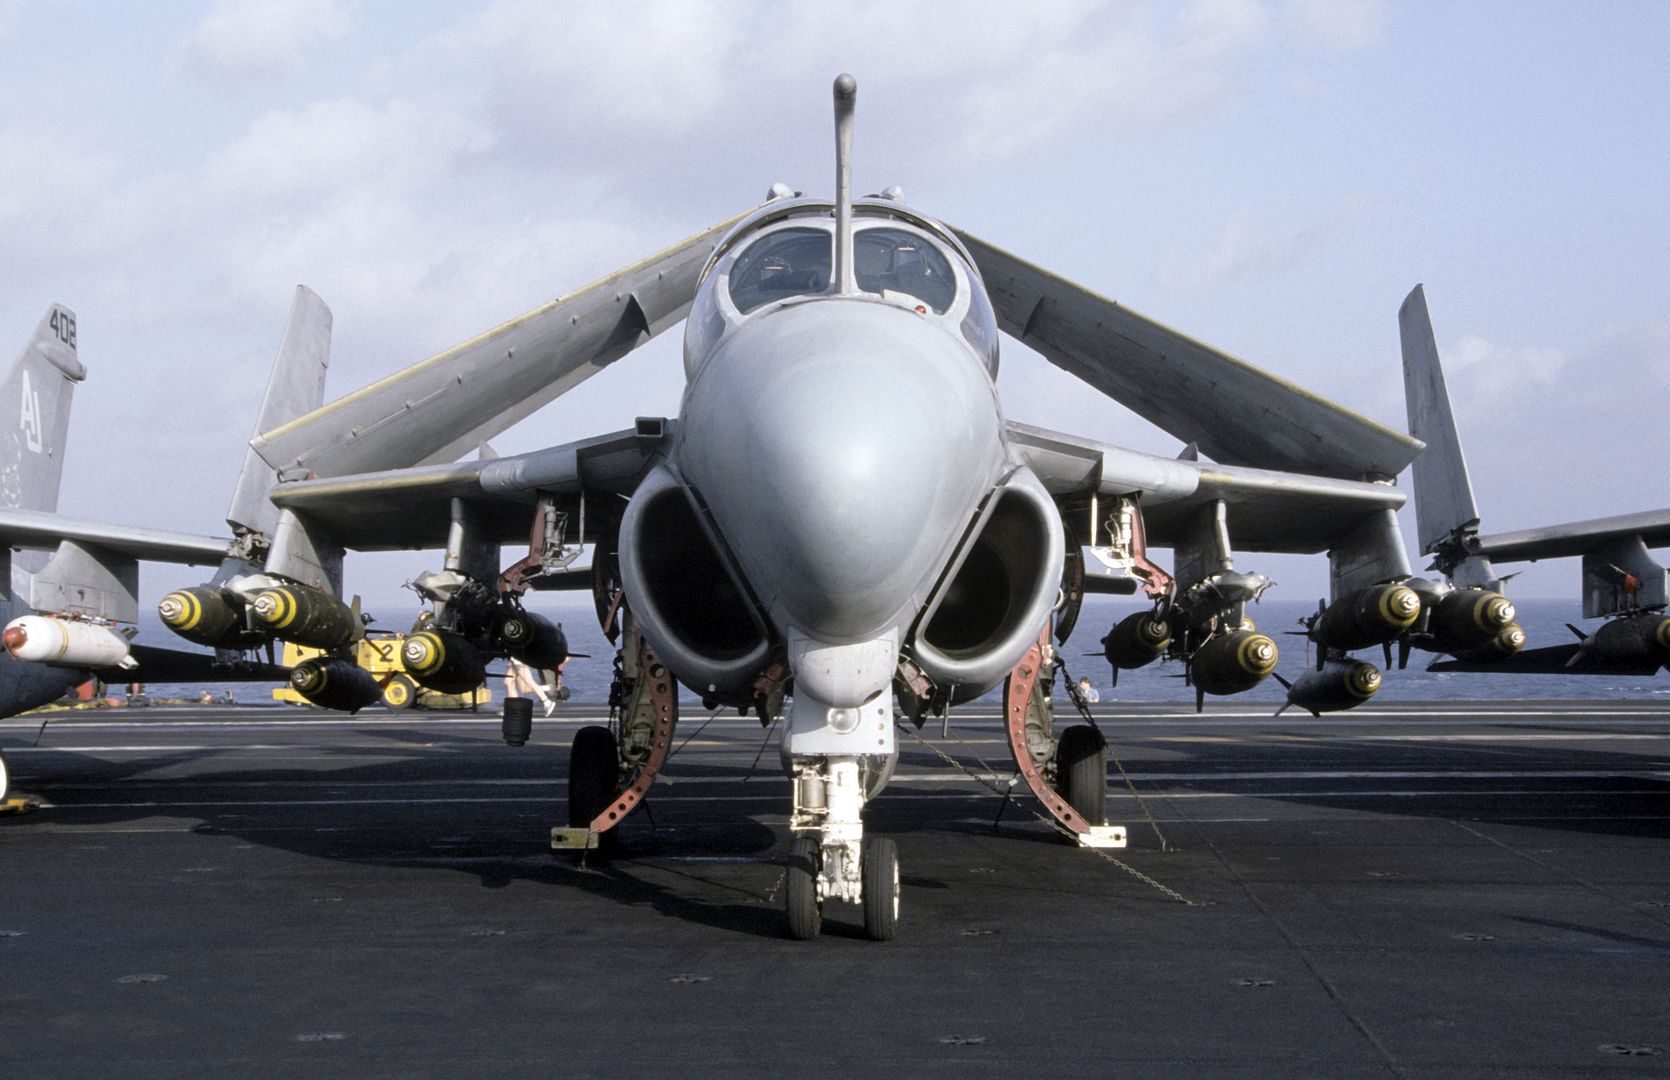 A Front View Of An A 6E Intruder Aircraft Armed With Mark 82 500 Pound Bombs Parked On The Flight Deck Of The Nuclear Powered Aircraft Carrier USS NIMITZ